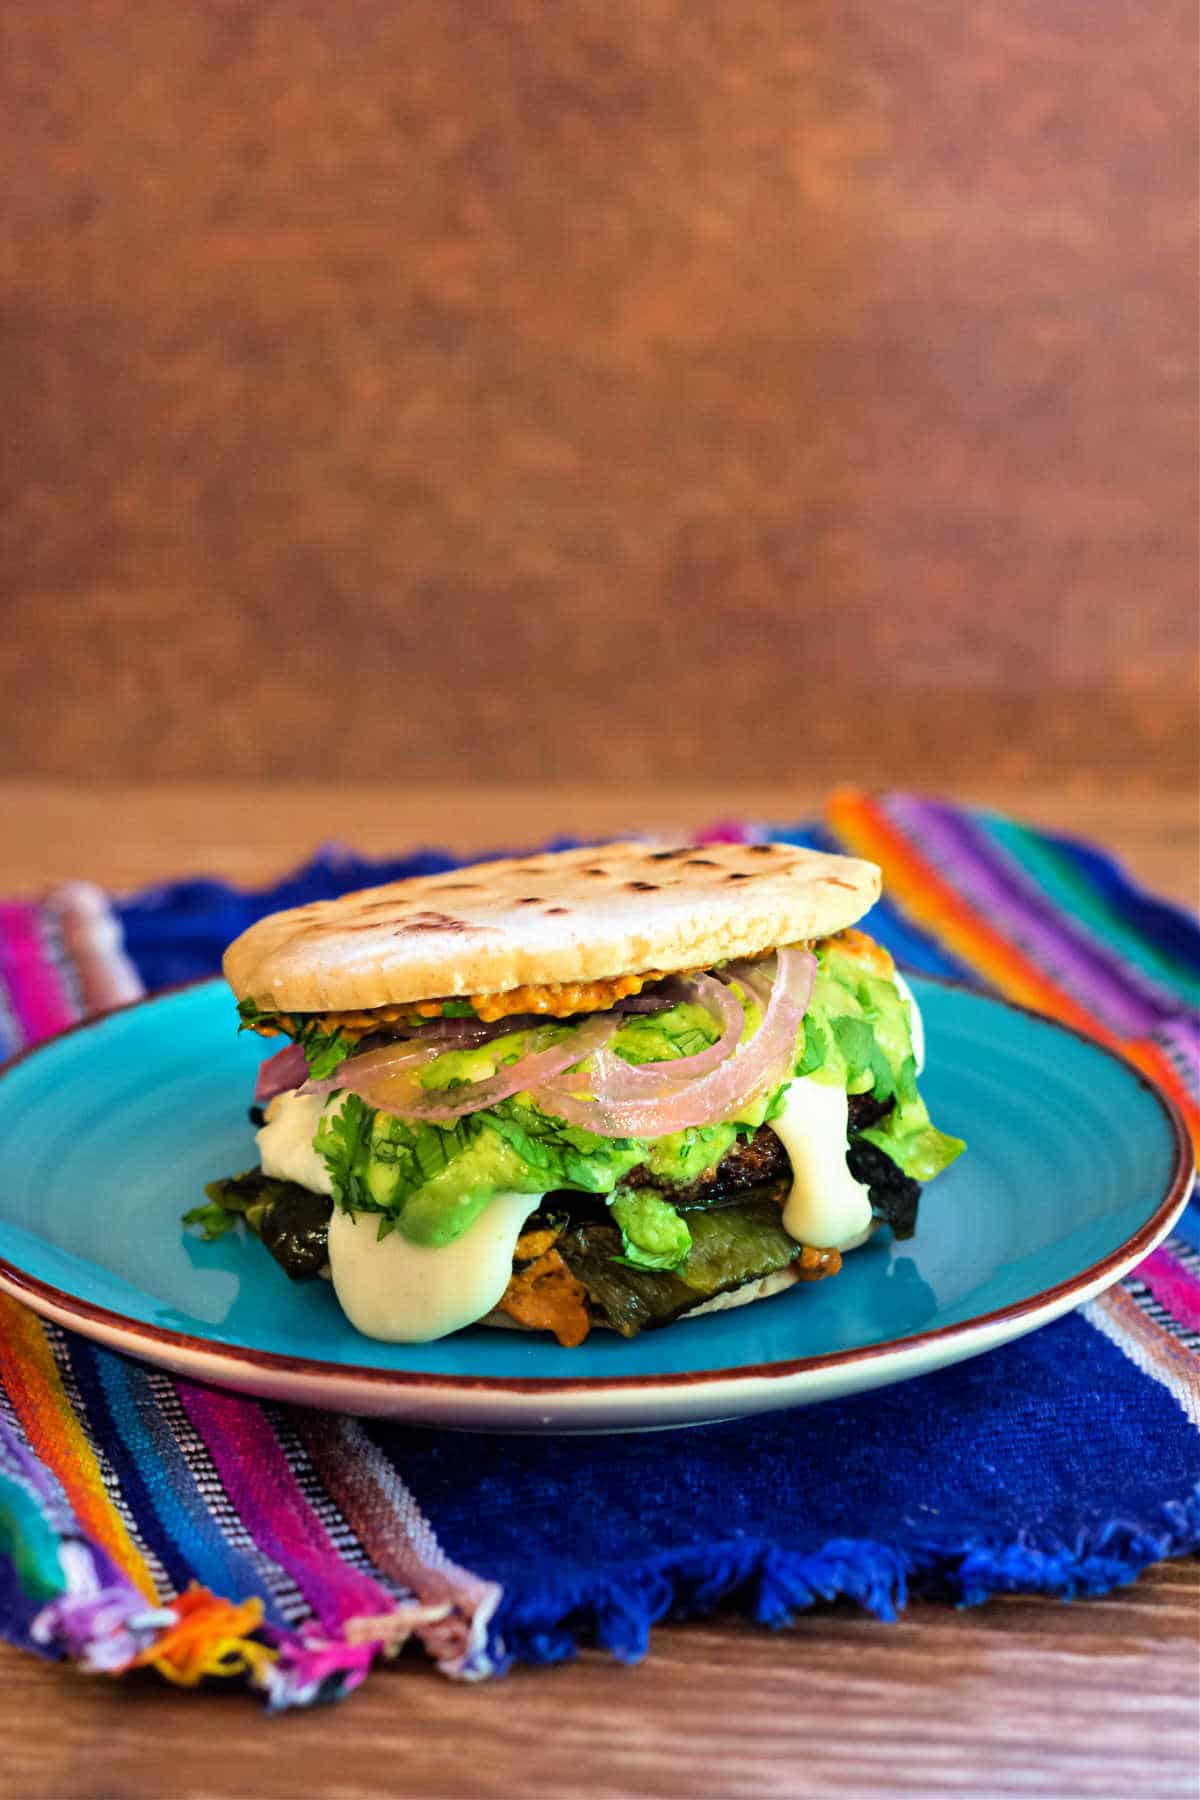 A burger with stuffed gorditas for buns on a blue plate